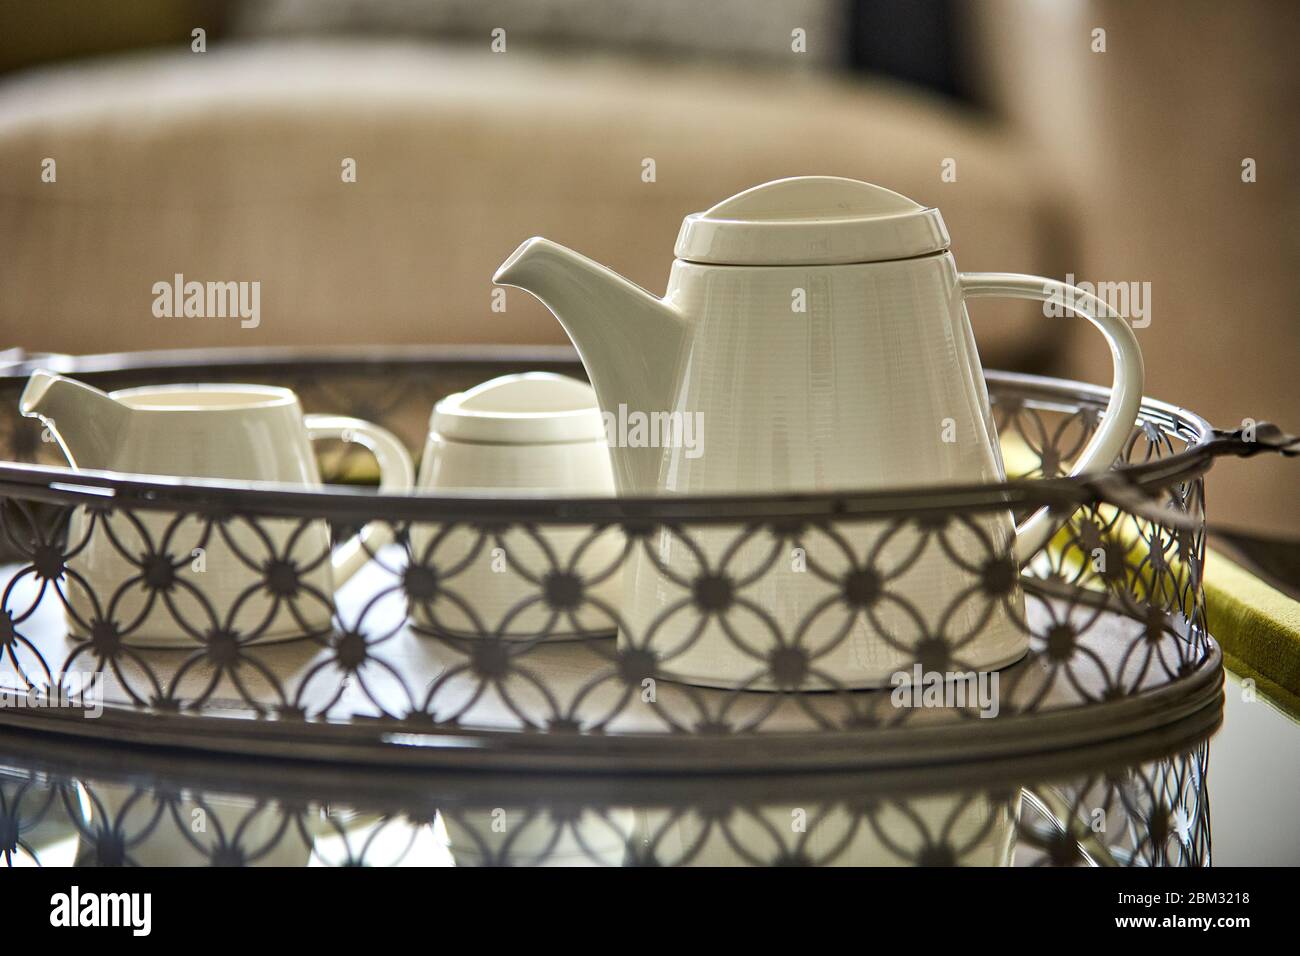 Shot of a white teapot and teacup on a tray Stock Photo